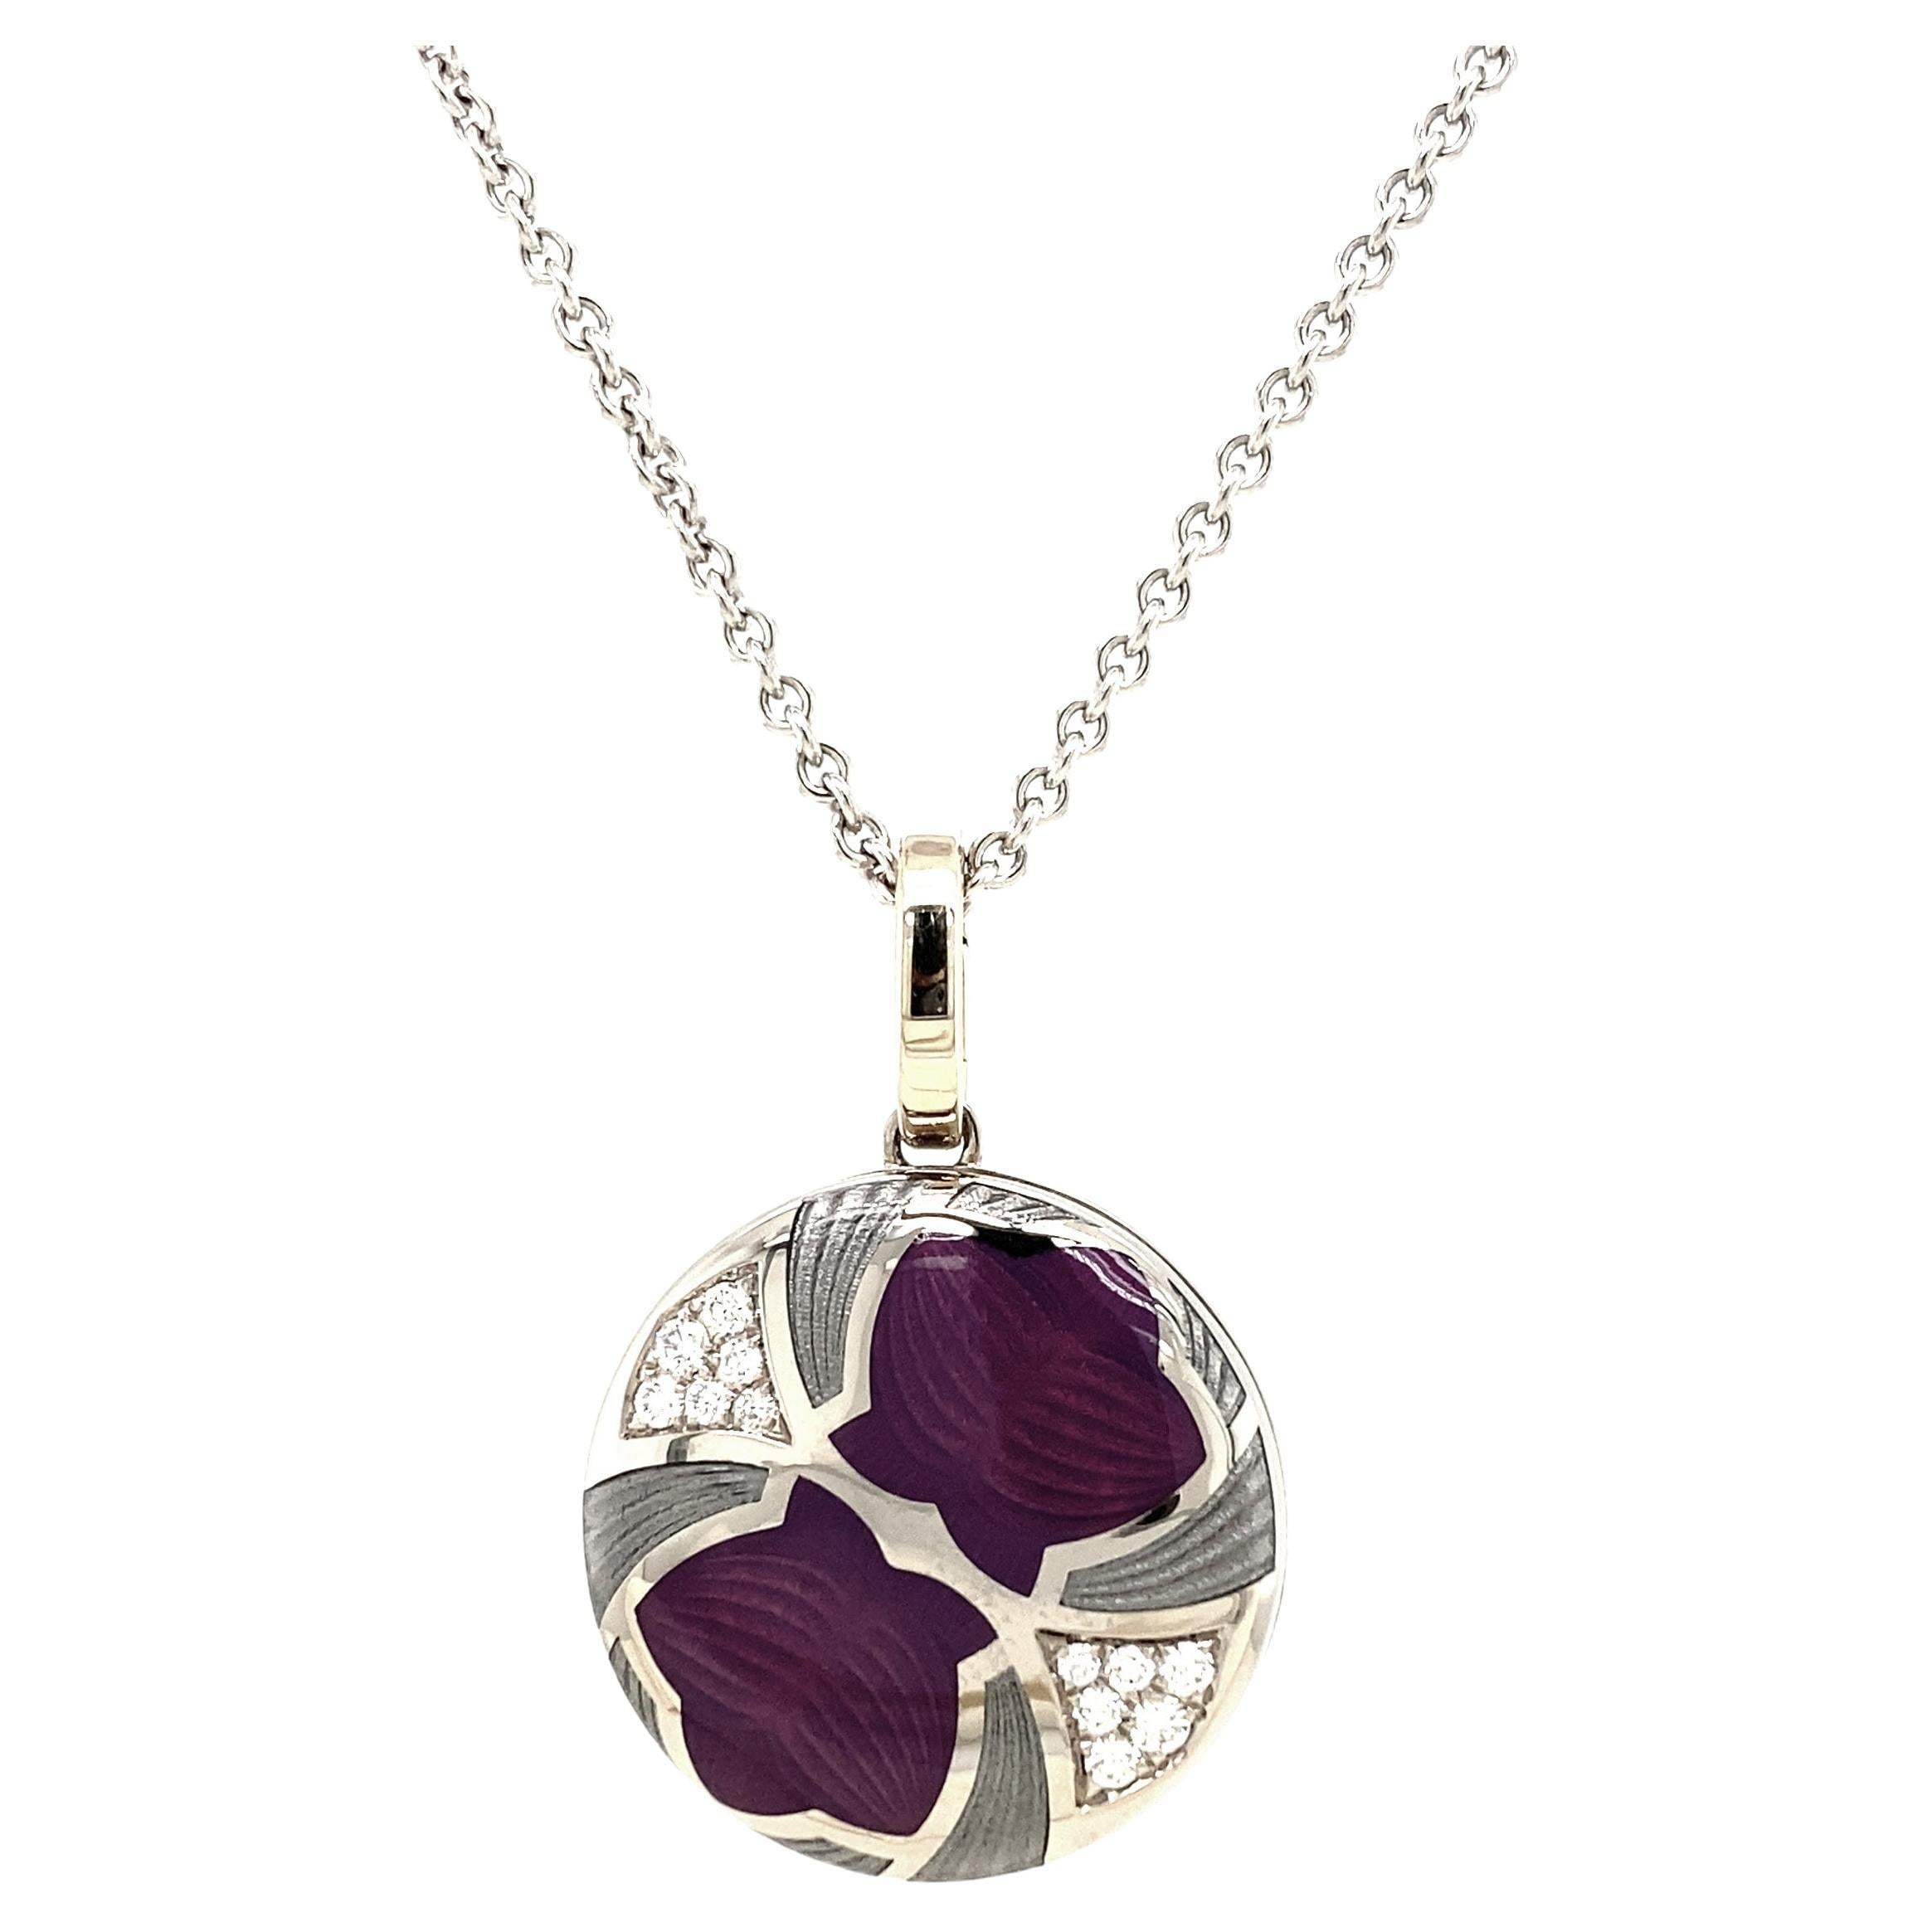 Round locket pendant necklace, 18k white gold, Merian Collection, opalescent purple and grey vitreous enamel, 12 diamonds, total 0.19 ct G VS, brilliant cut

About the creator Victor Mayer
Victor Mayer is internationally renowned for elegant